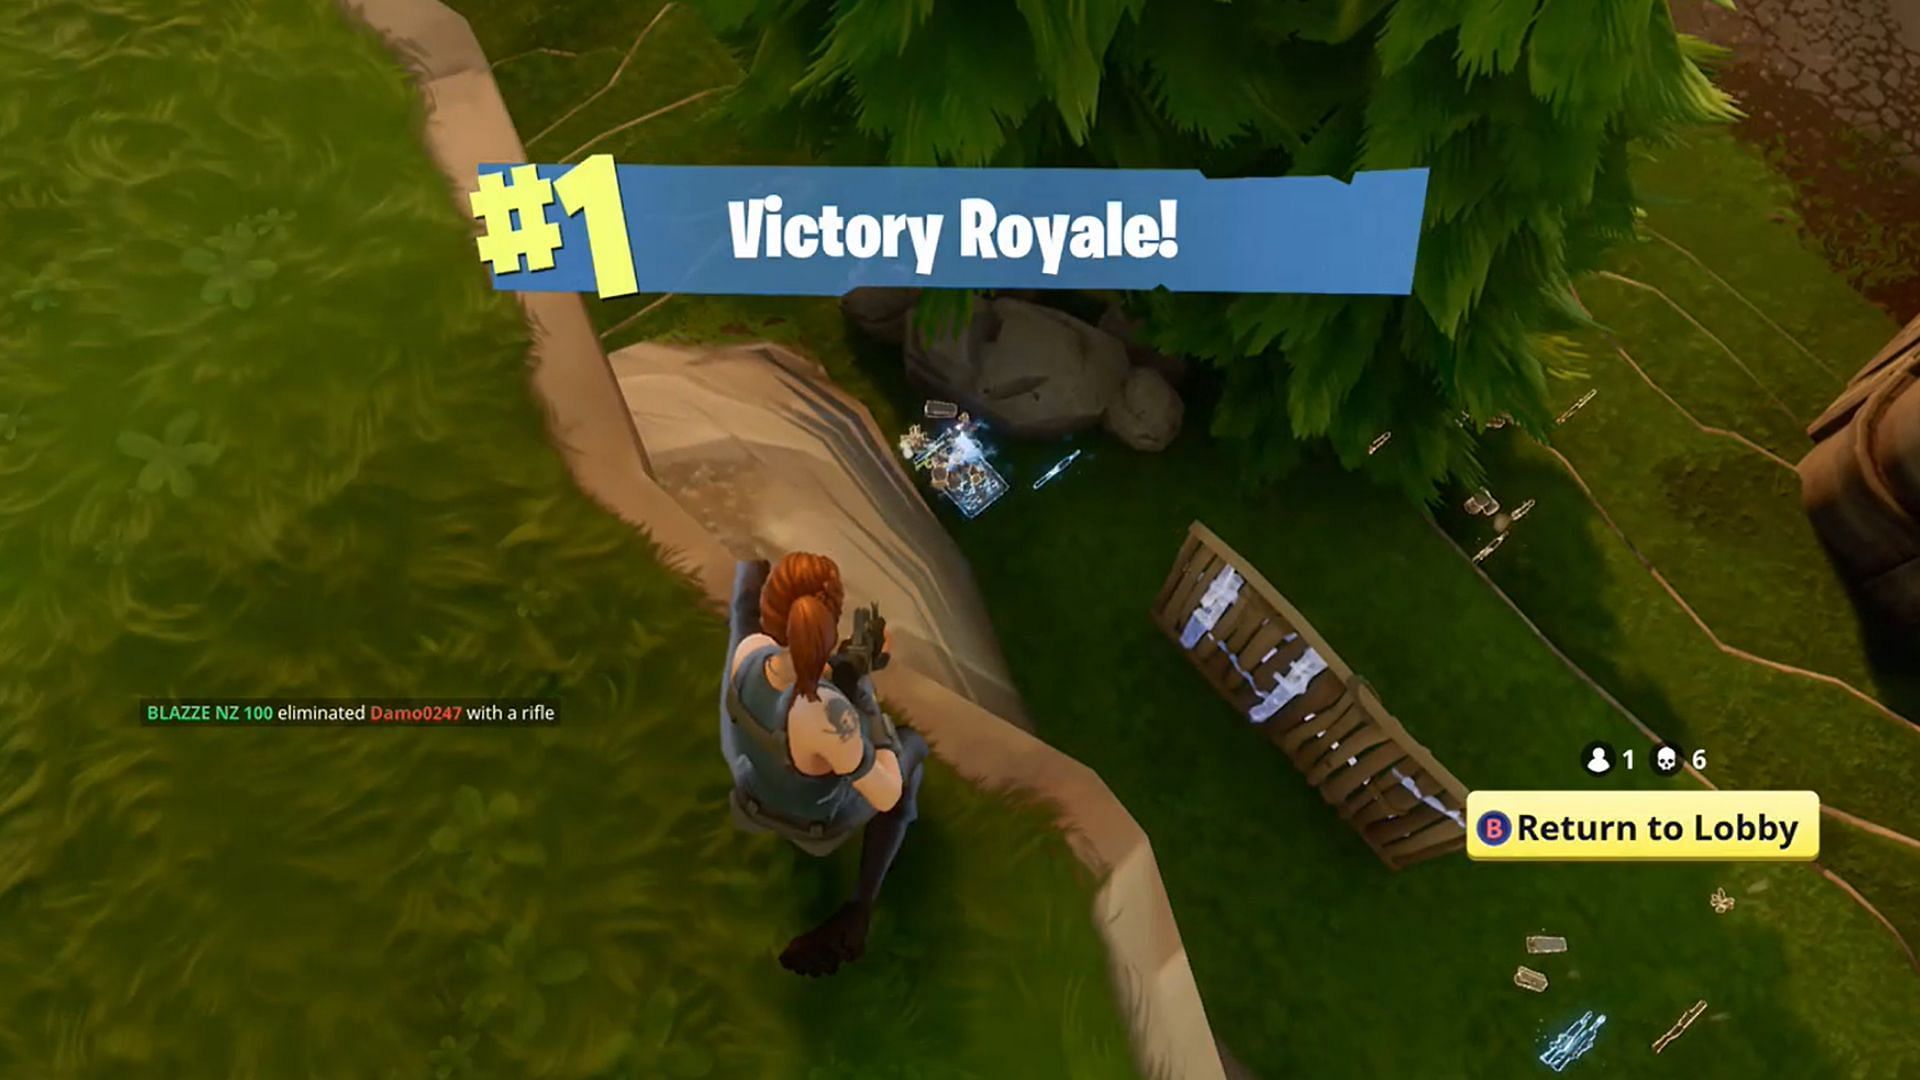 OG Fortnite player showcases their first ever Victory Royale, community overwhelmed with nostalgia